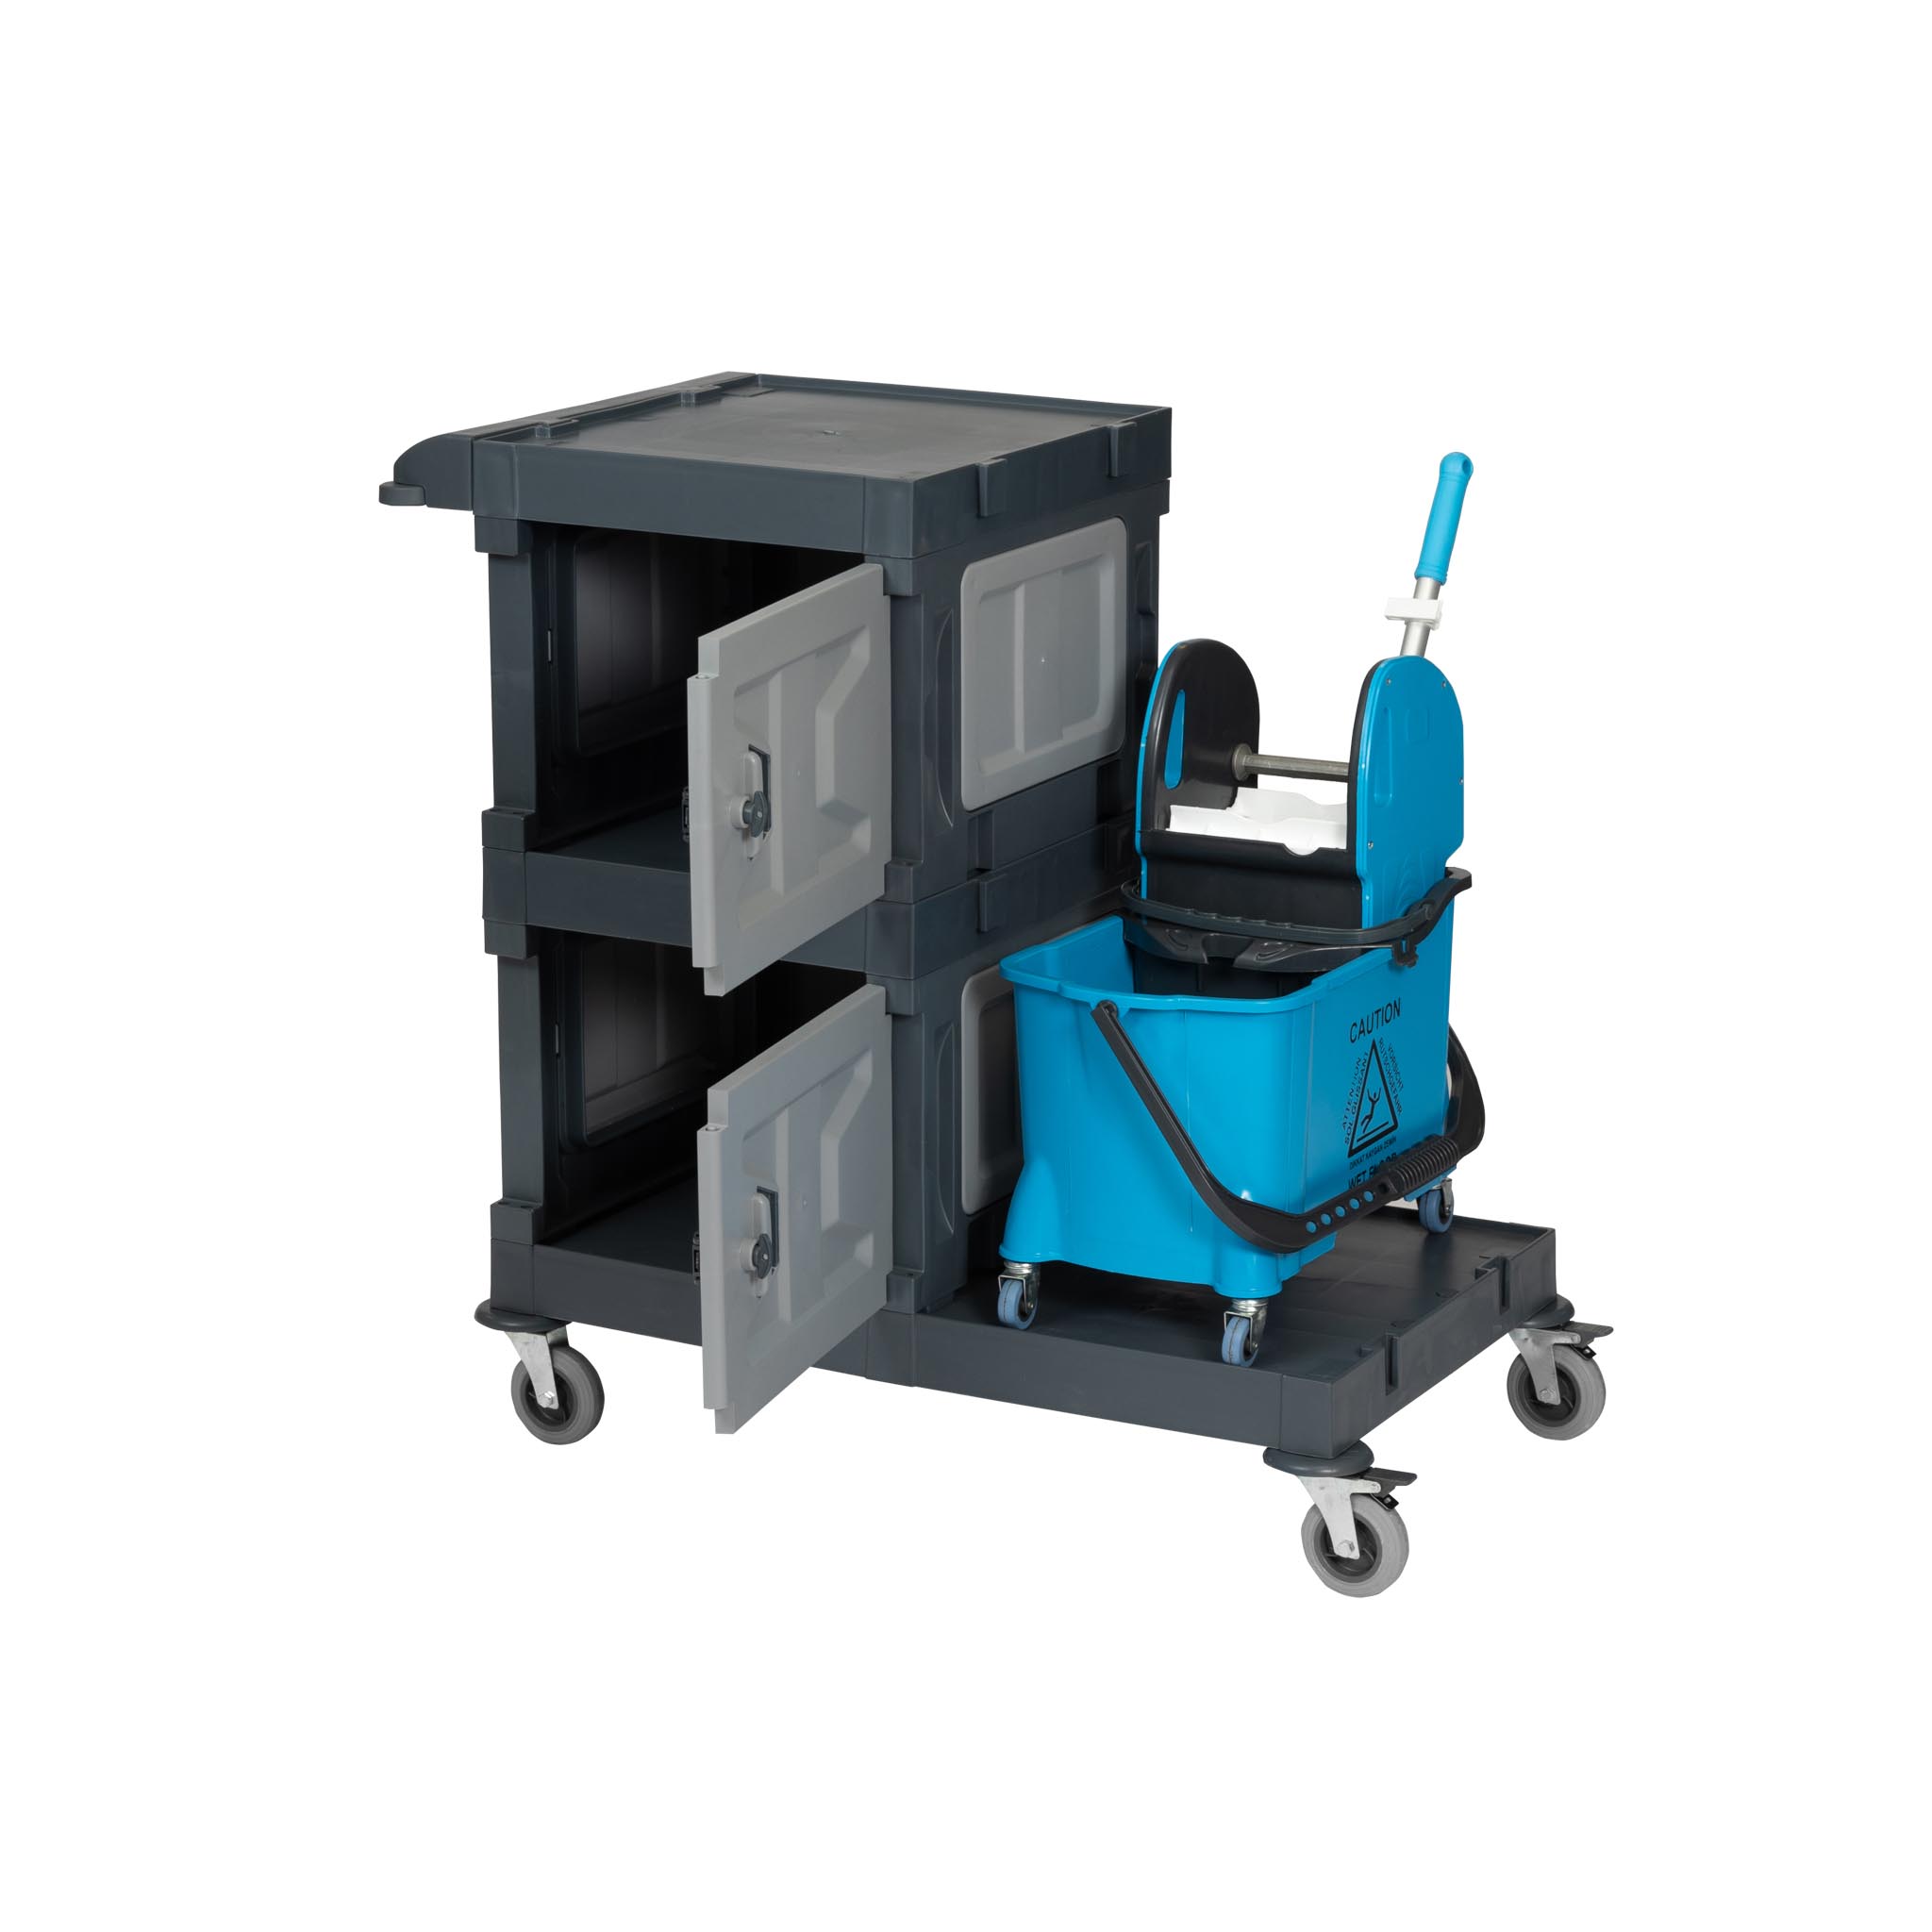  ALFACART HOSPITAL CLEANING TROLLEY